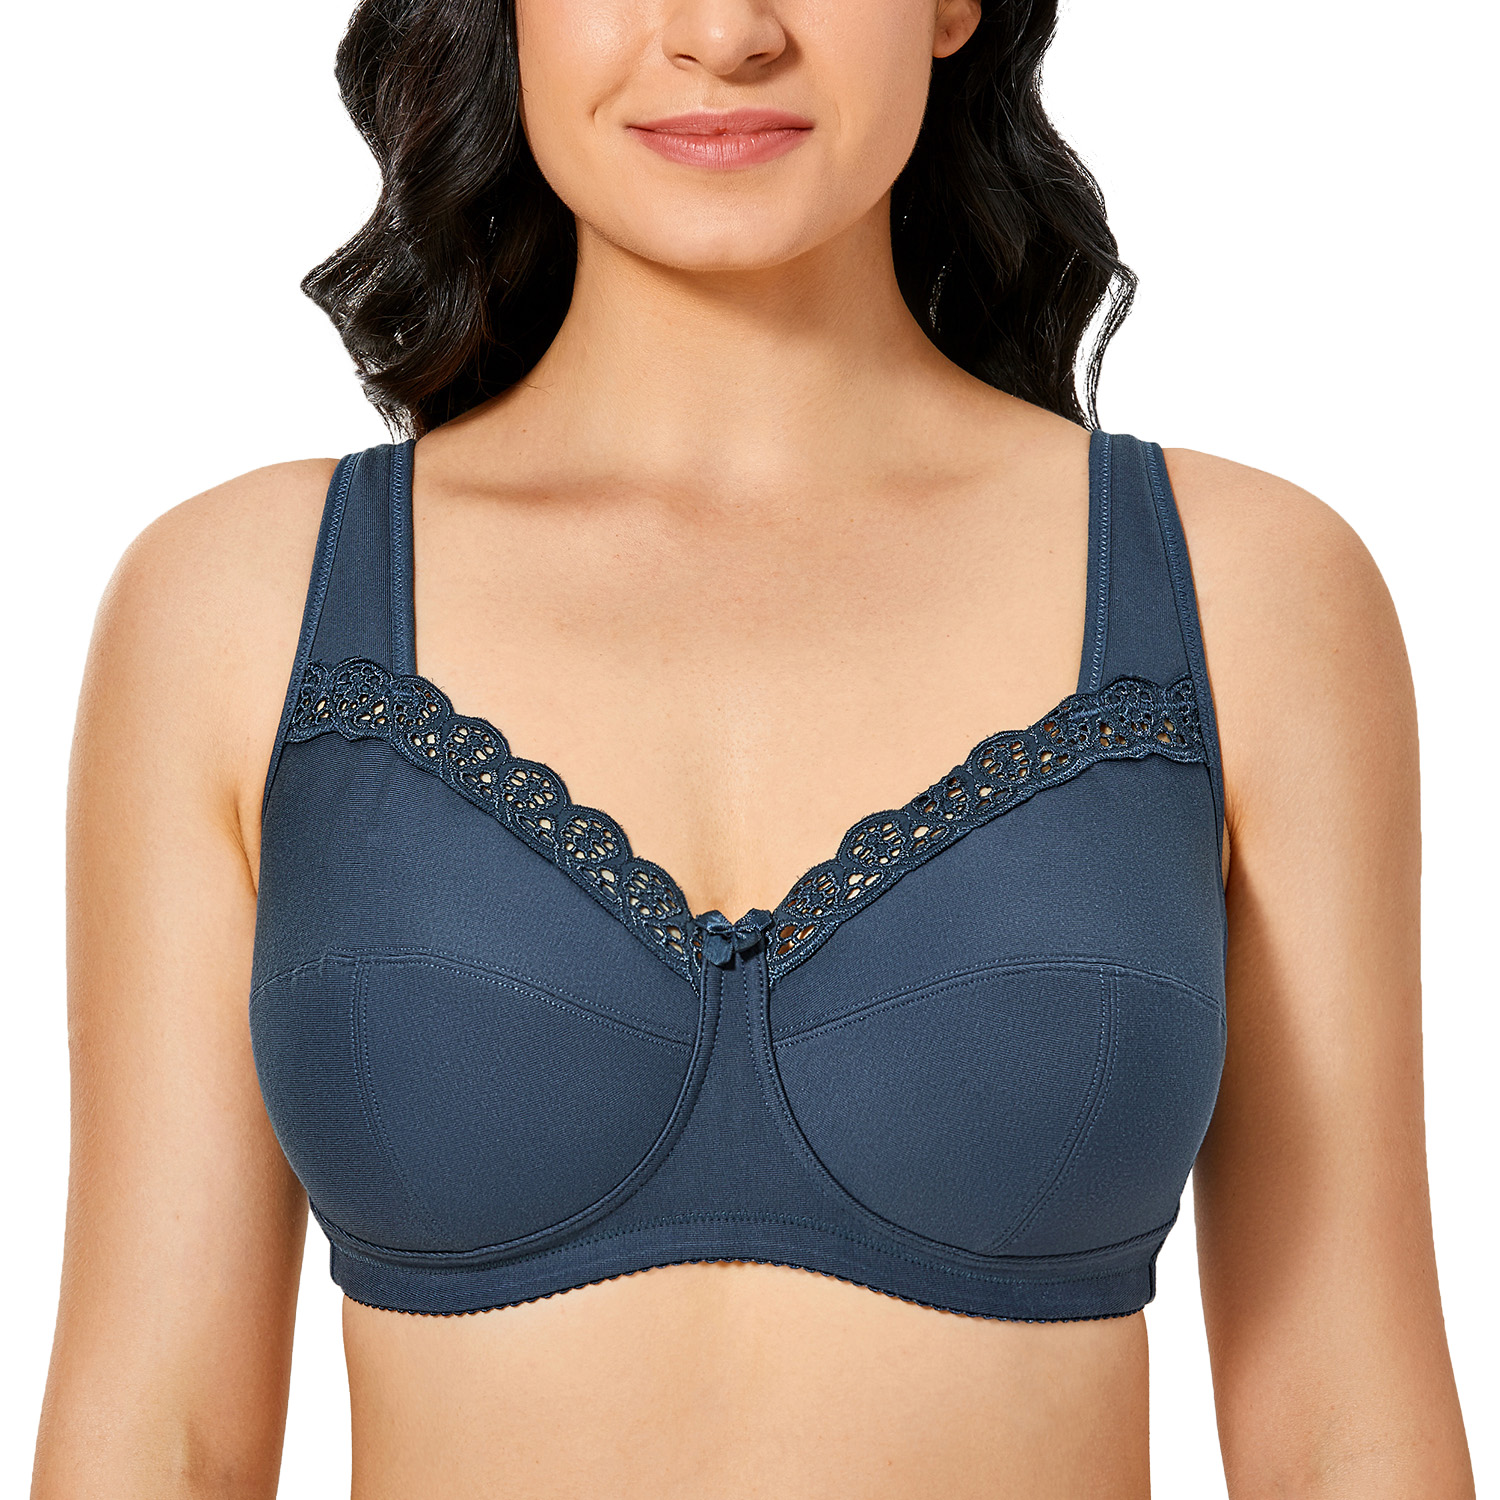 Women's Full Coverage Bra Wirefree Non-Padded Plus Size Support Cotton